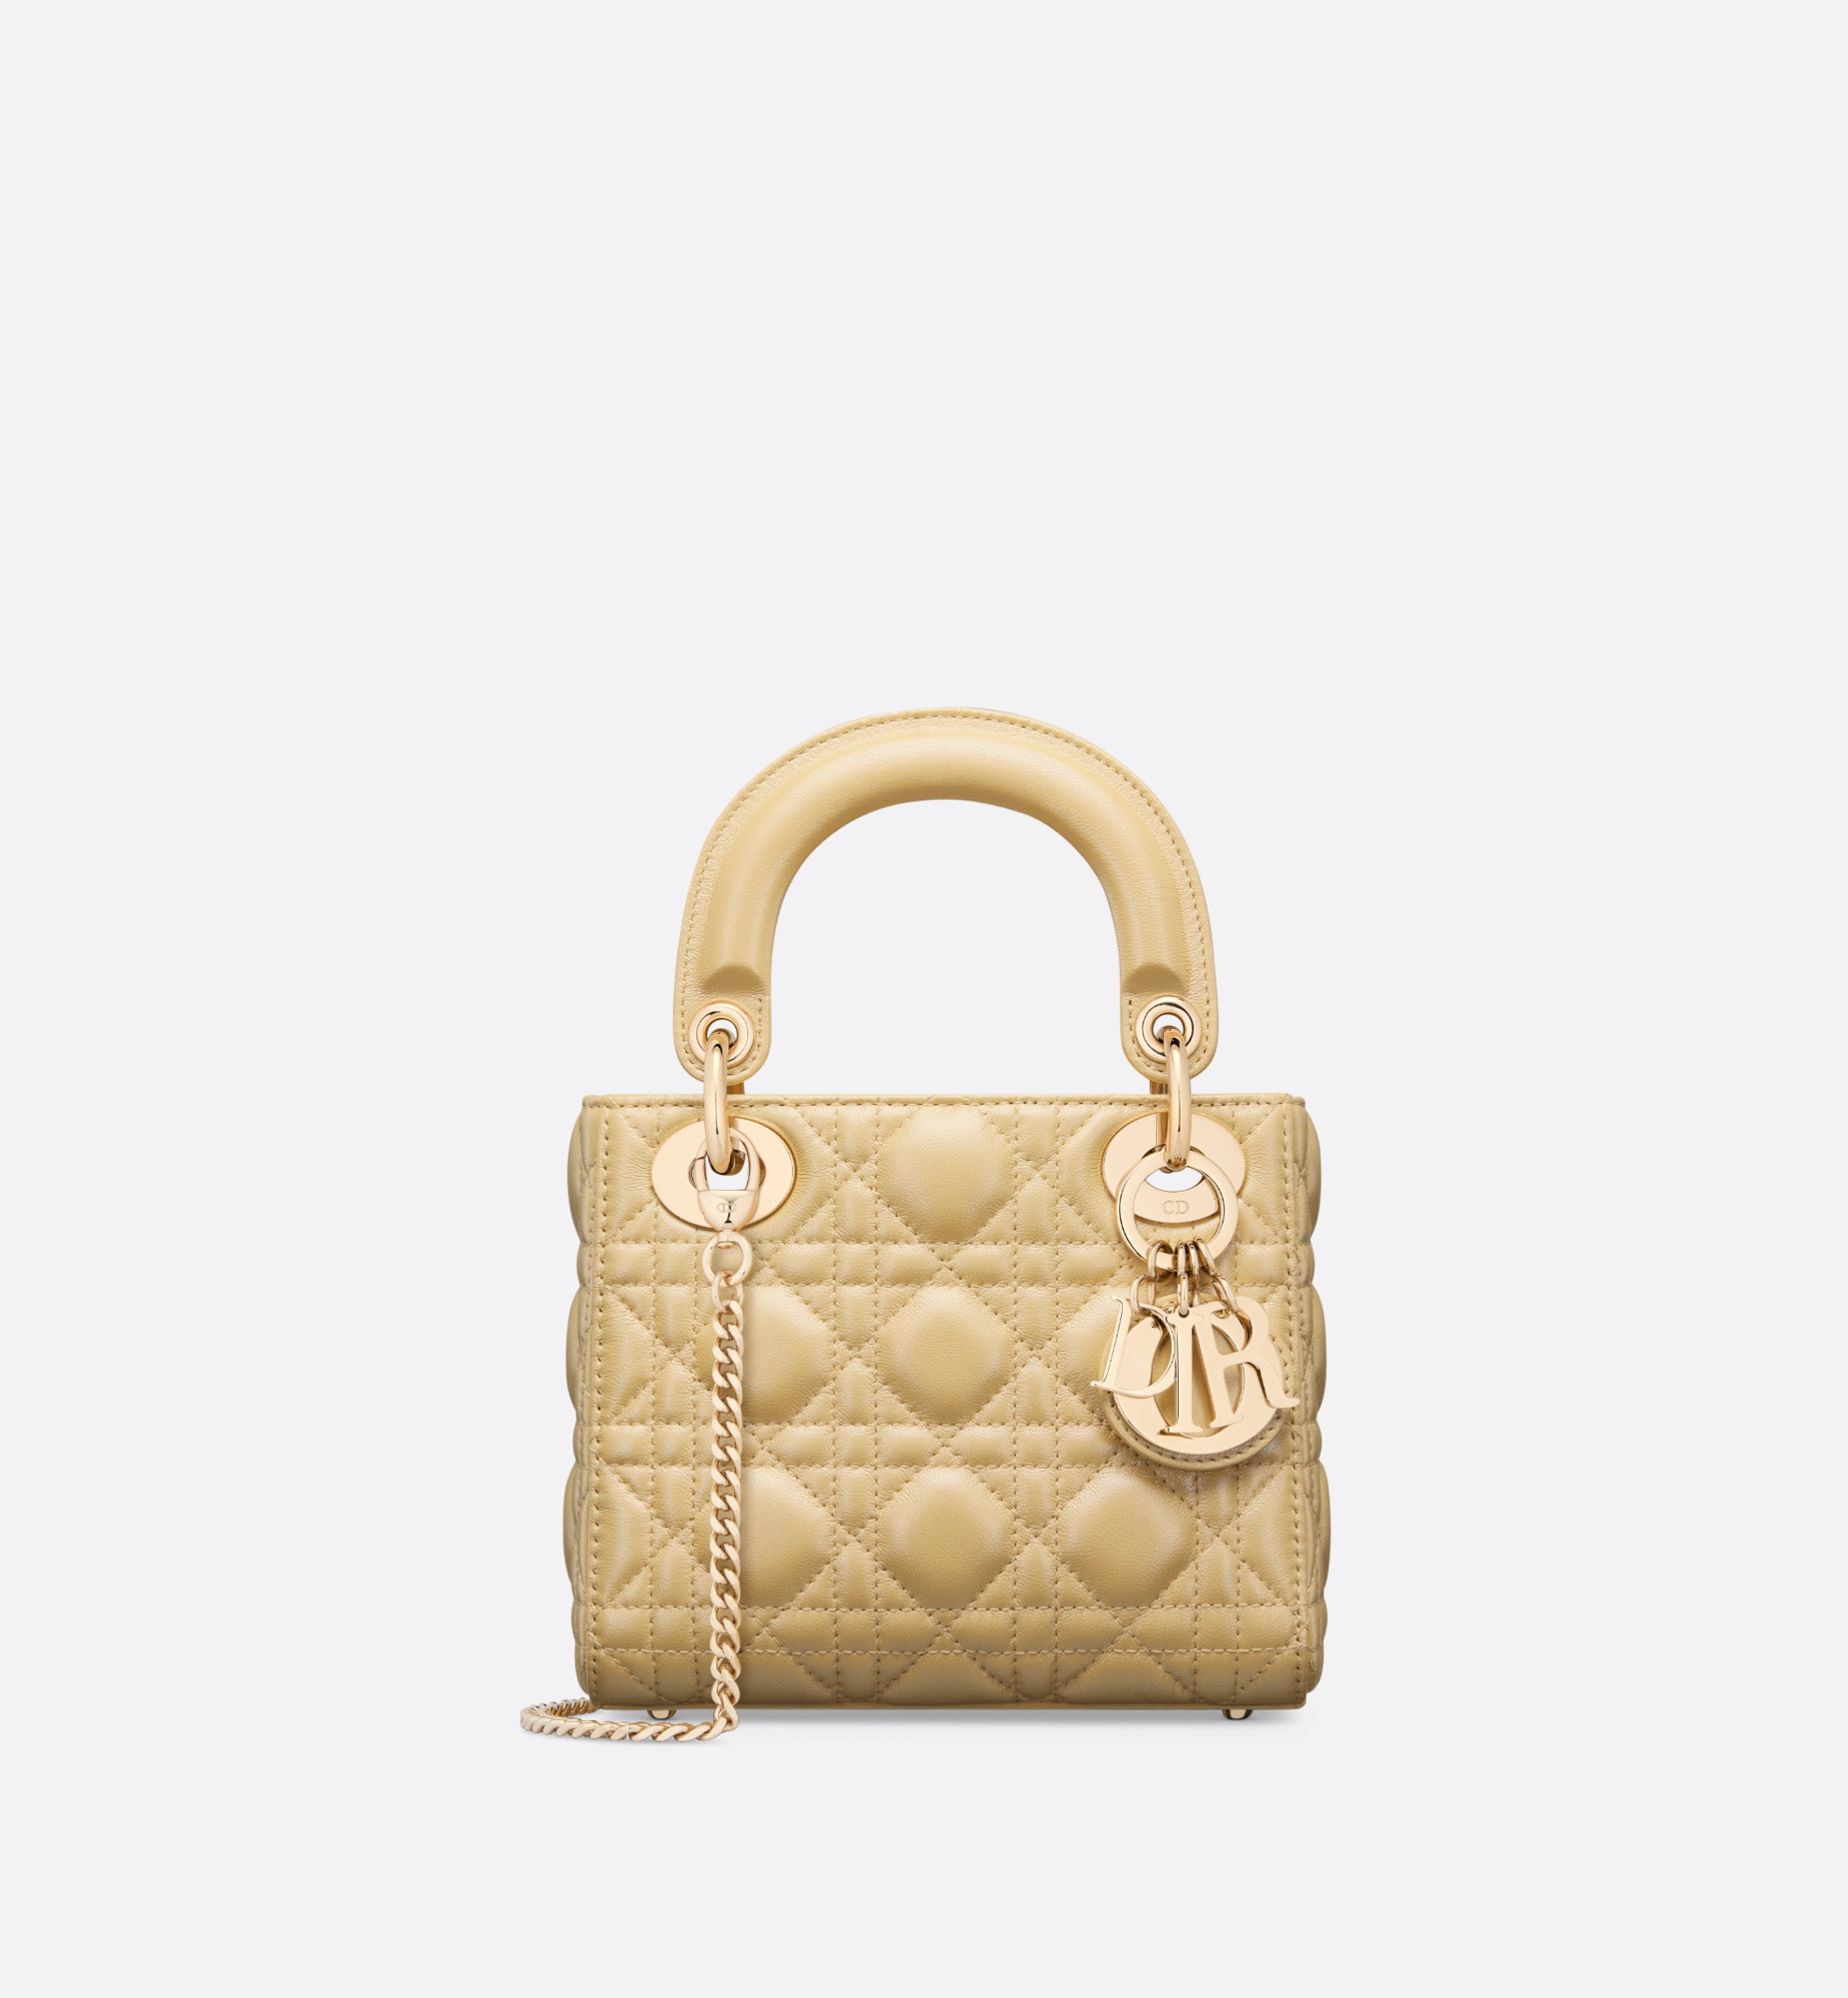 Mini lady dior bag pastel yellow pearlescent cannage lambskin